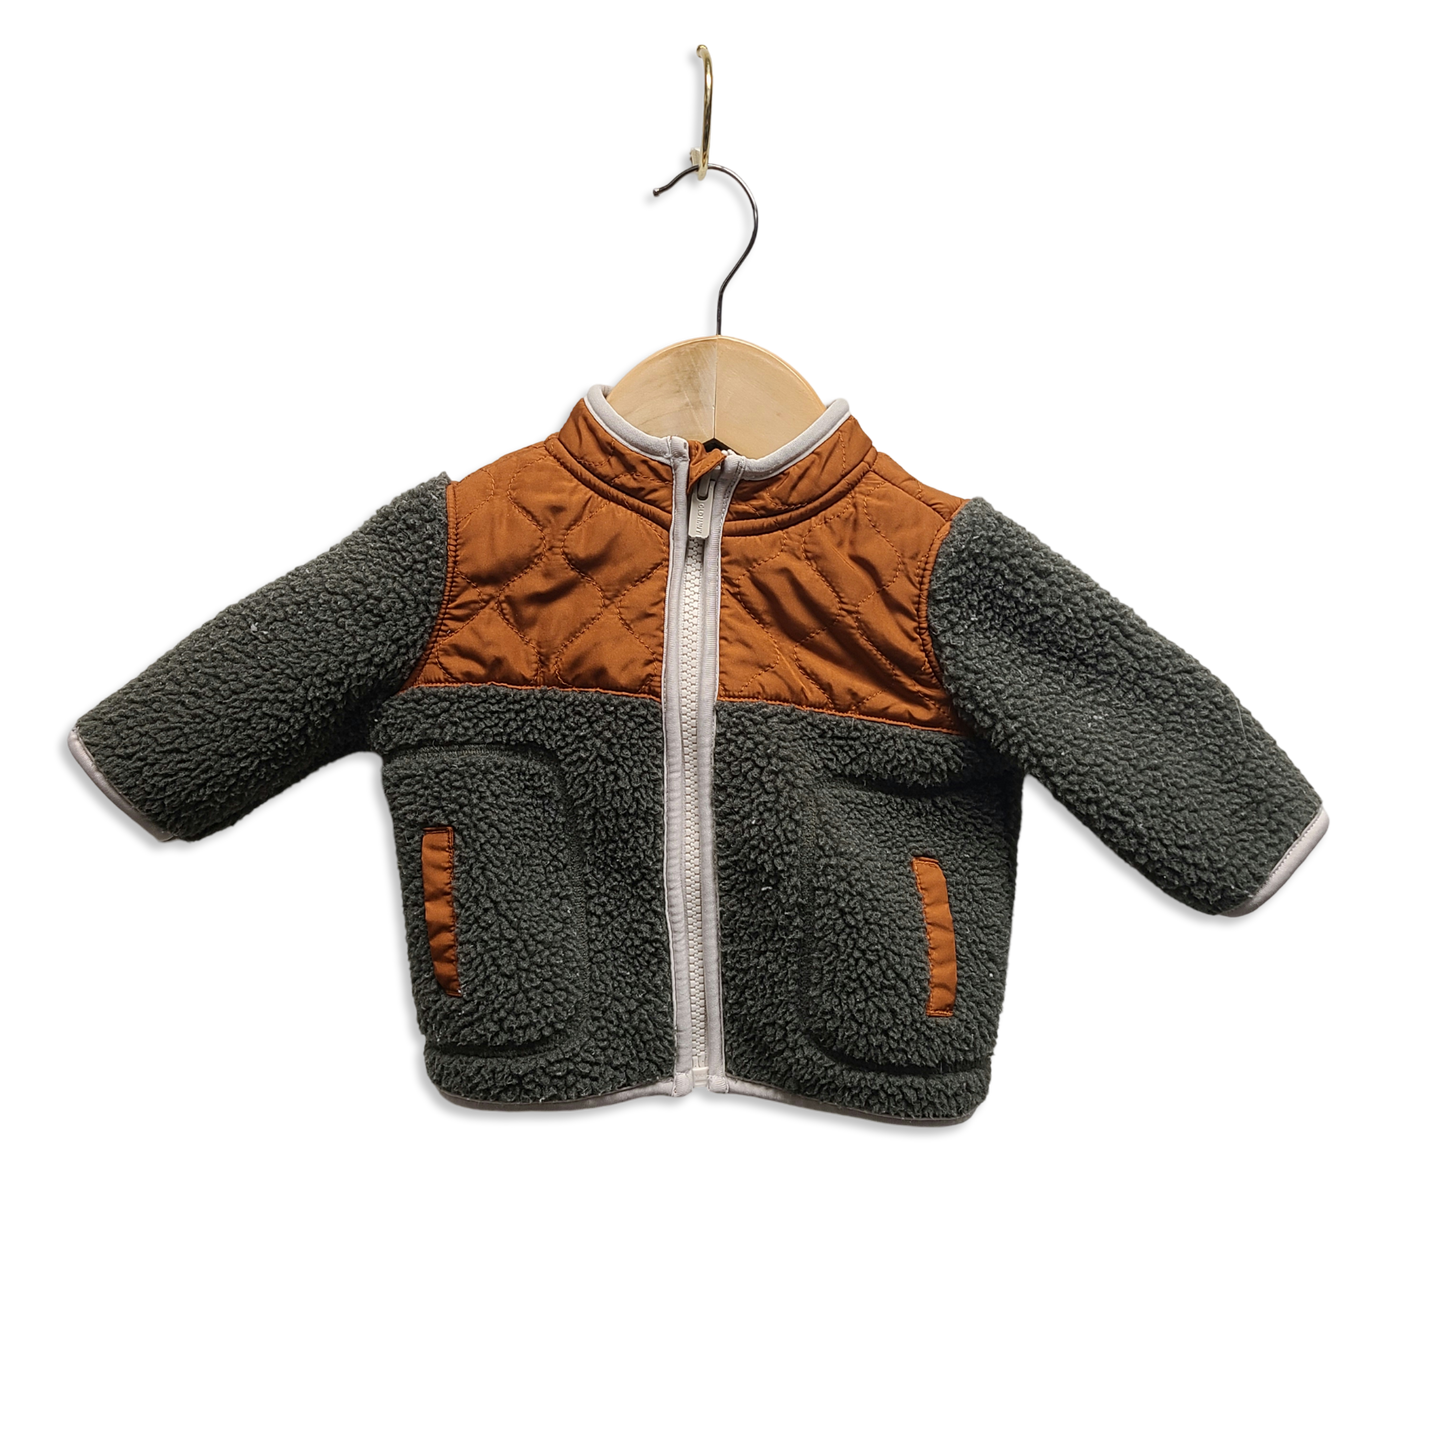 Old Navy -Sweater 0-3 Months - March 21 Drop